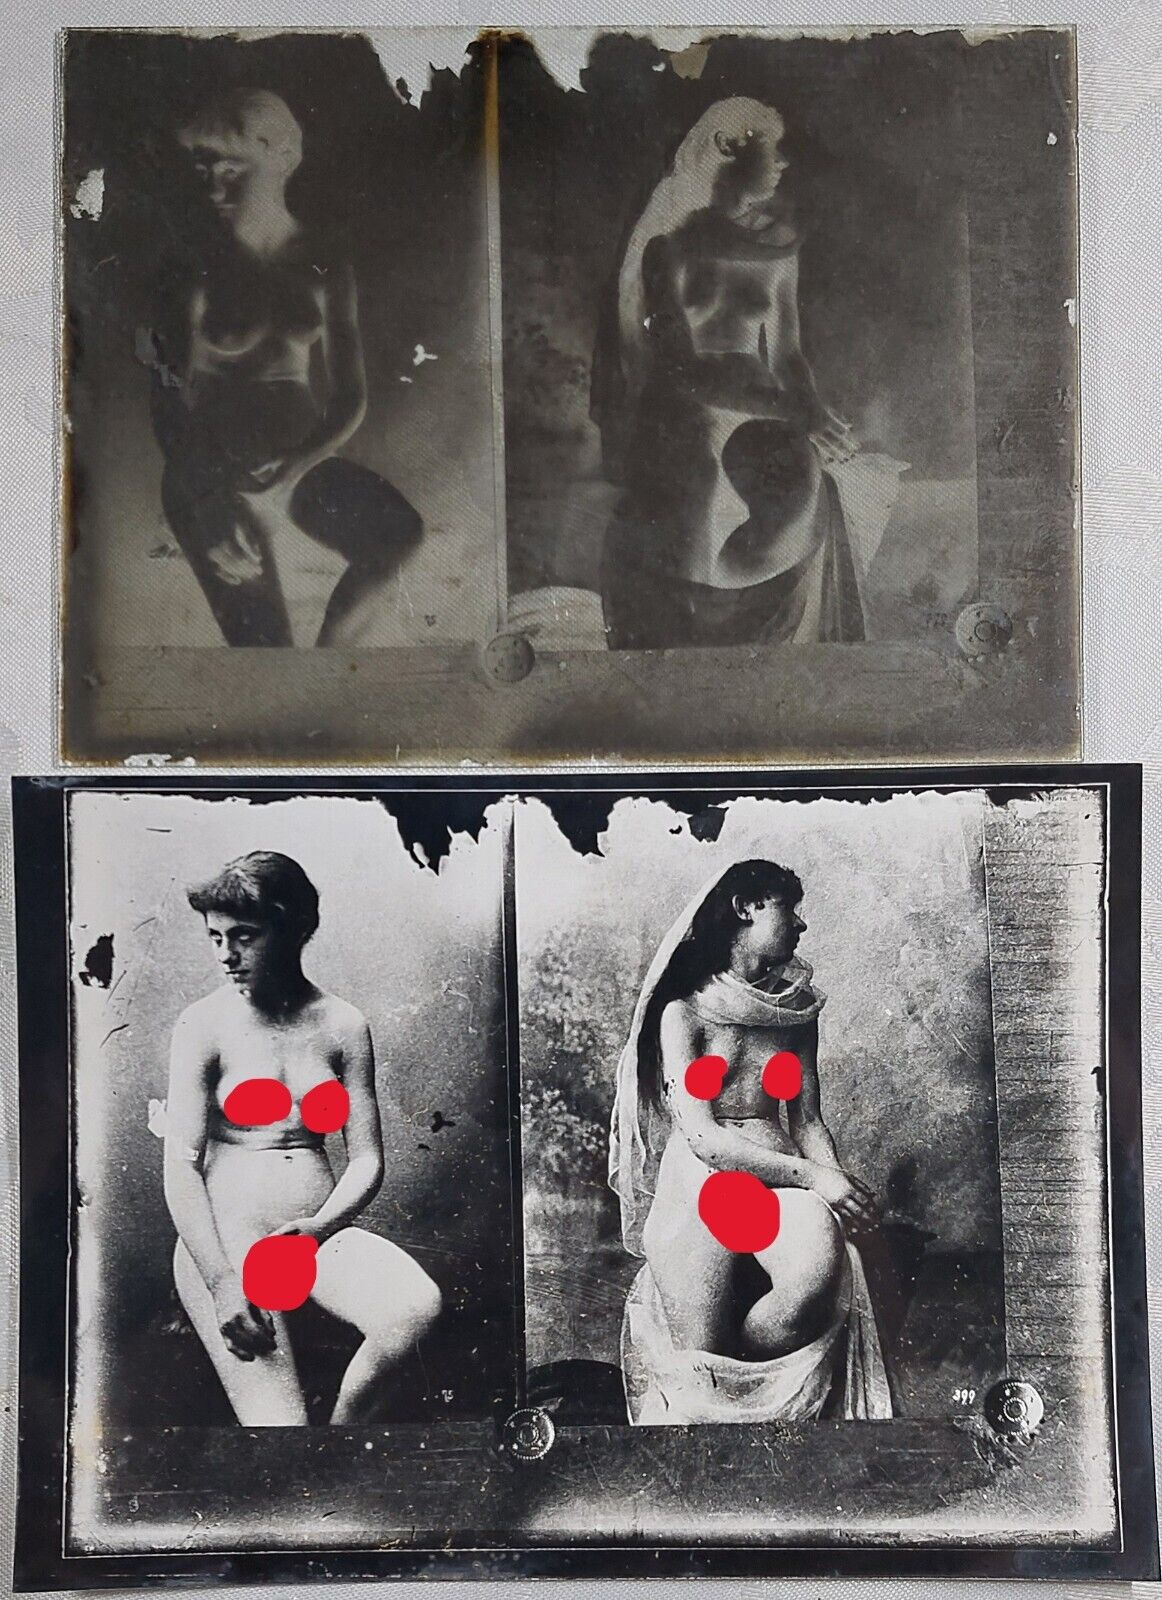 Rare Antique 19th/ 20th Century Glass Plate Negative Photograph Pin Up Nudes #1